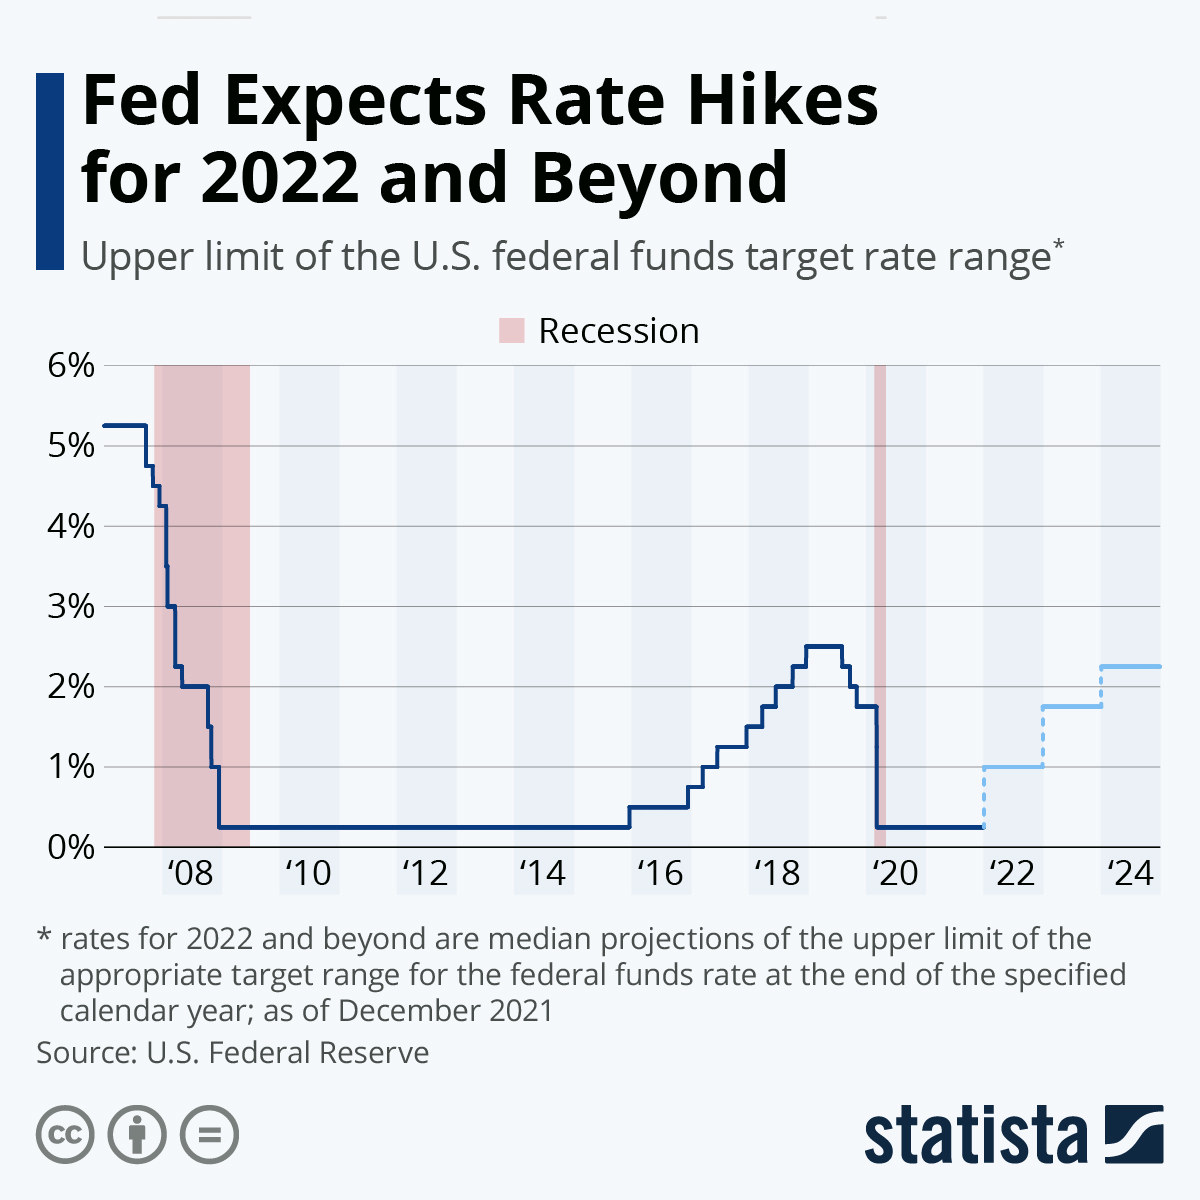 Fed Expects Rate Hikes for 2022 and Beyond